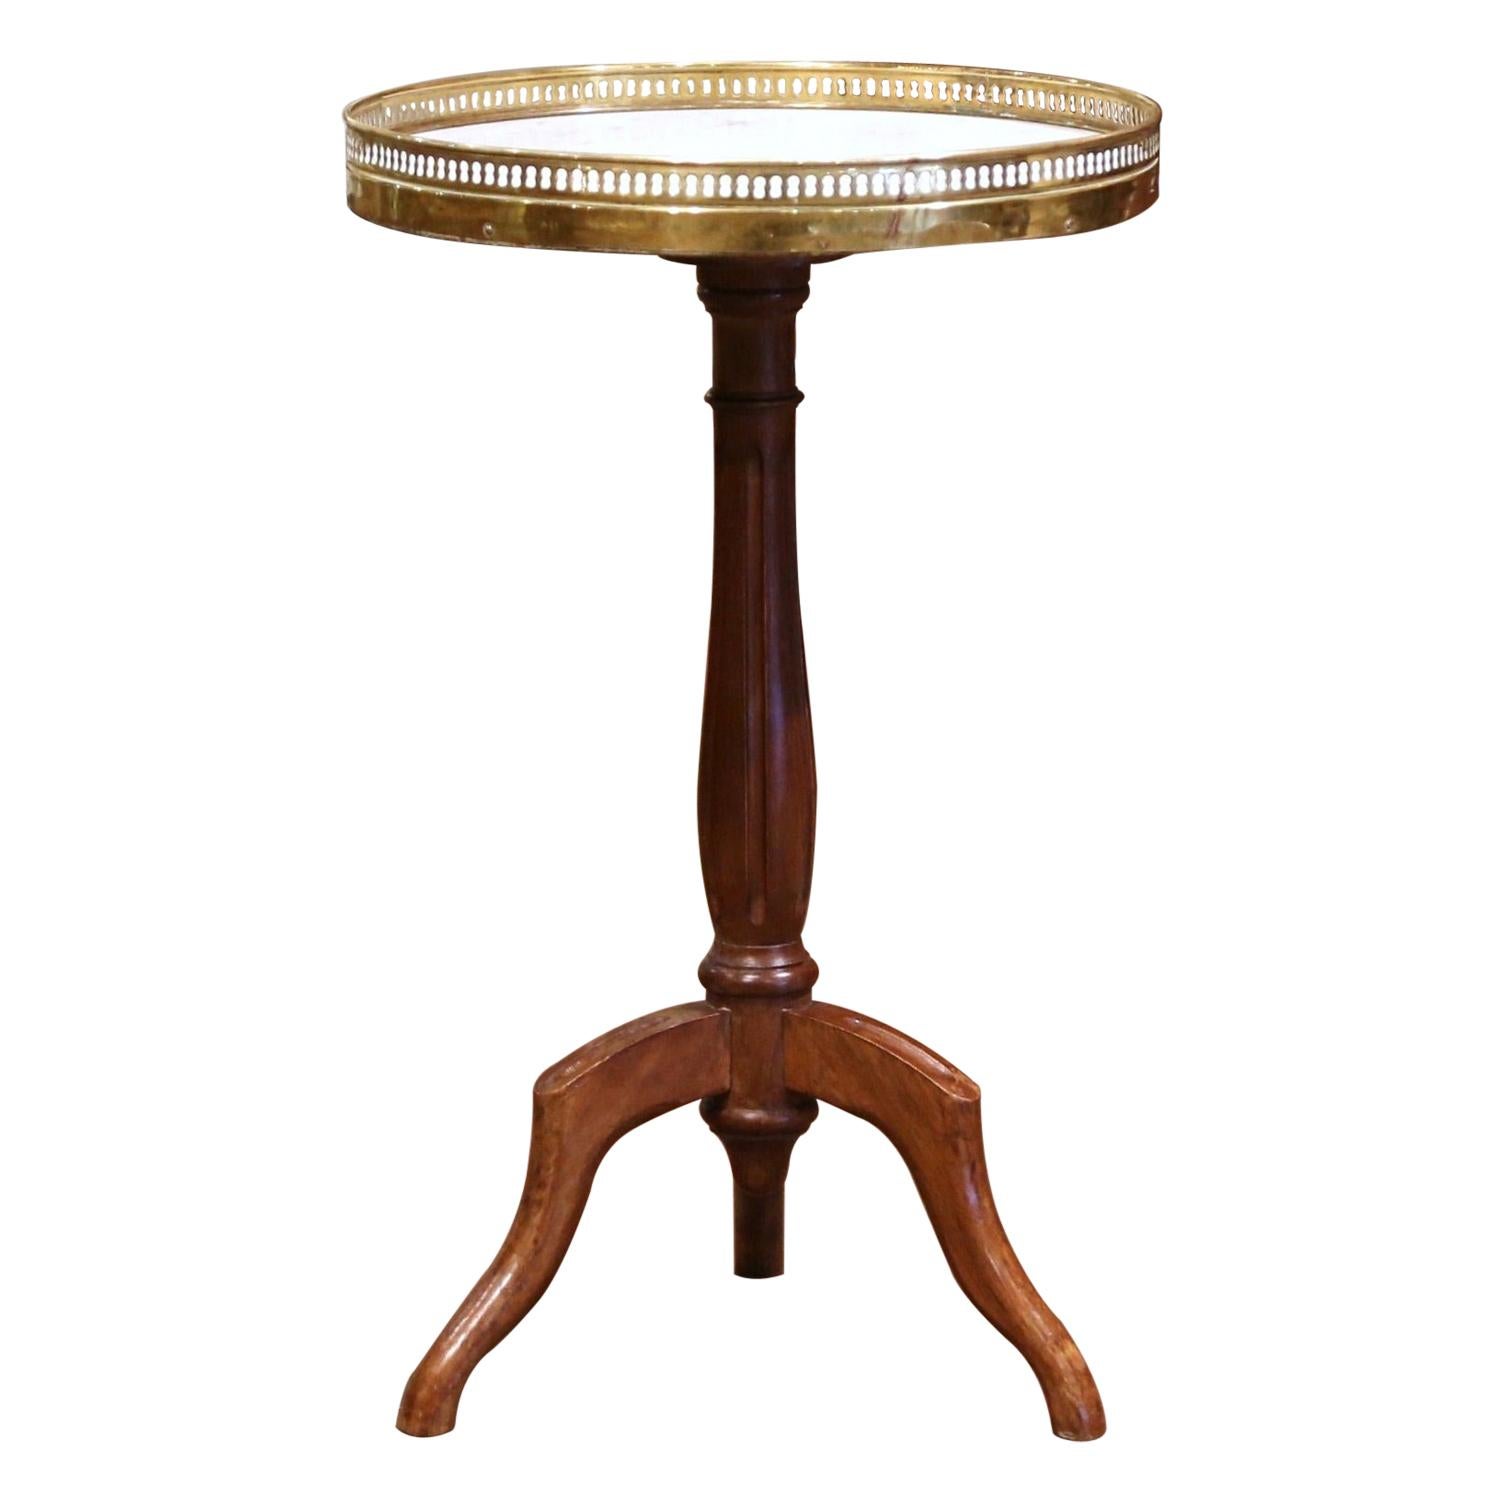 Early 20th Century French Carved Walnut and White Marble Side Pedestal Table